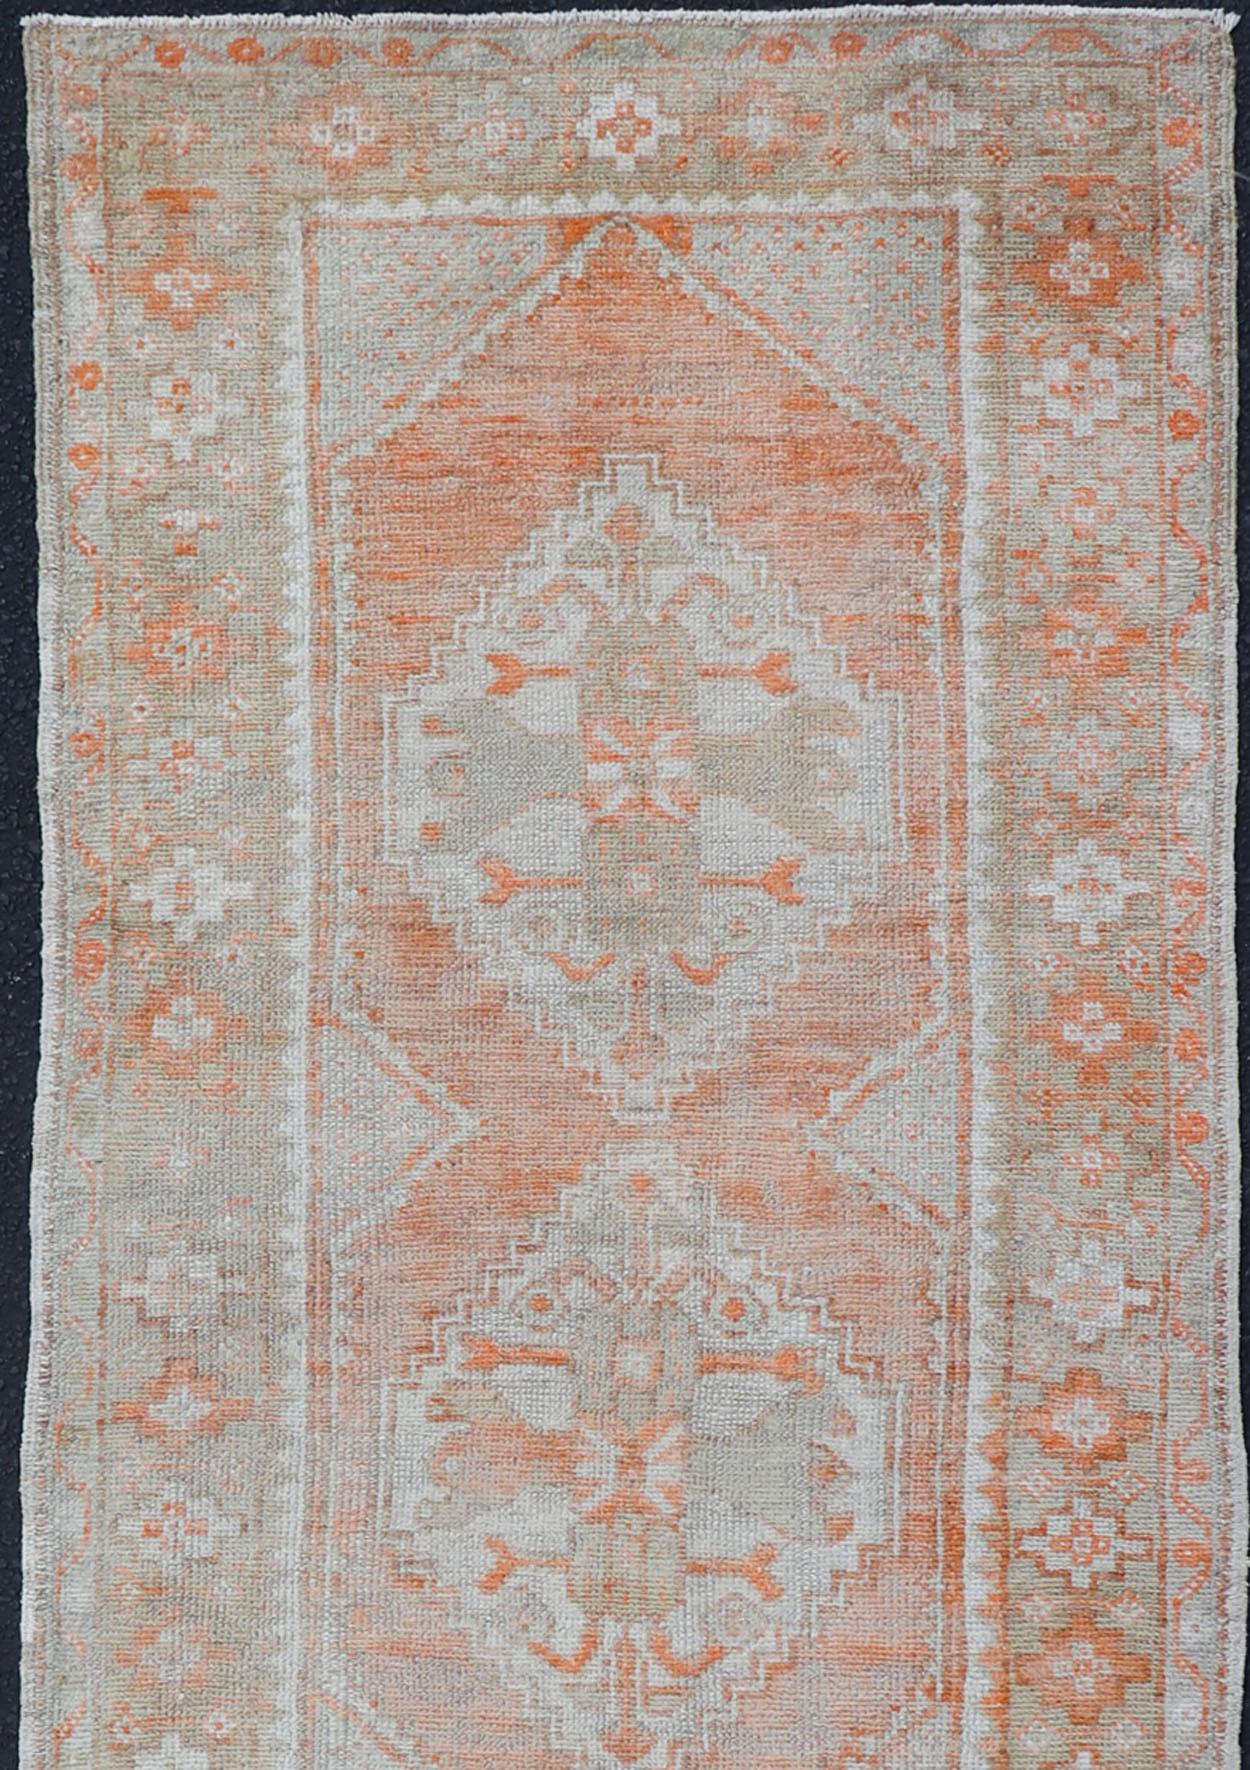 Antique Turkish Oushak runner with floral medallions, Keivan Woven Arts rug/EN-2499, country of origin / type: Turkey / Oushak, circa 1930.

This antique Oushak runner features a unique blend of soft colors scheme and an intricately beautiful